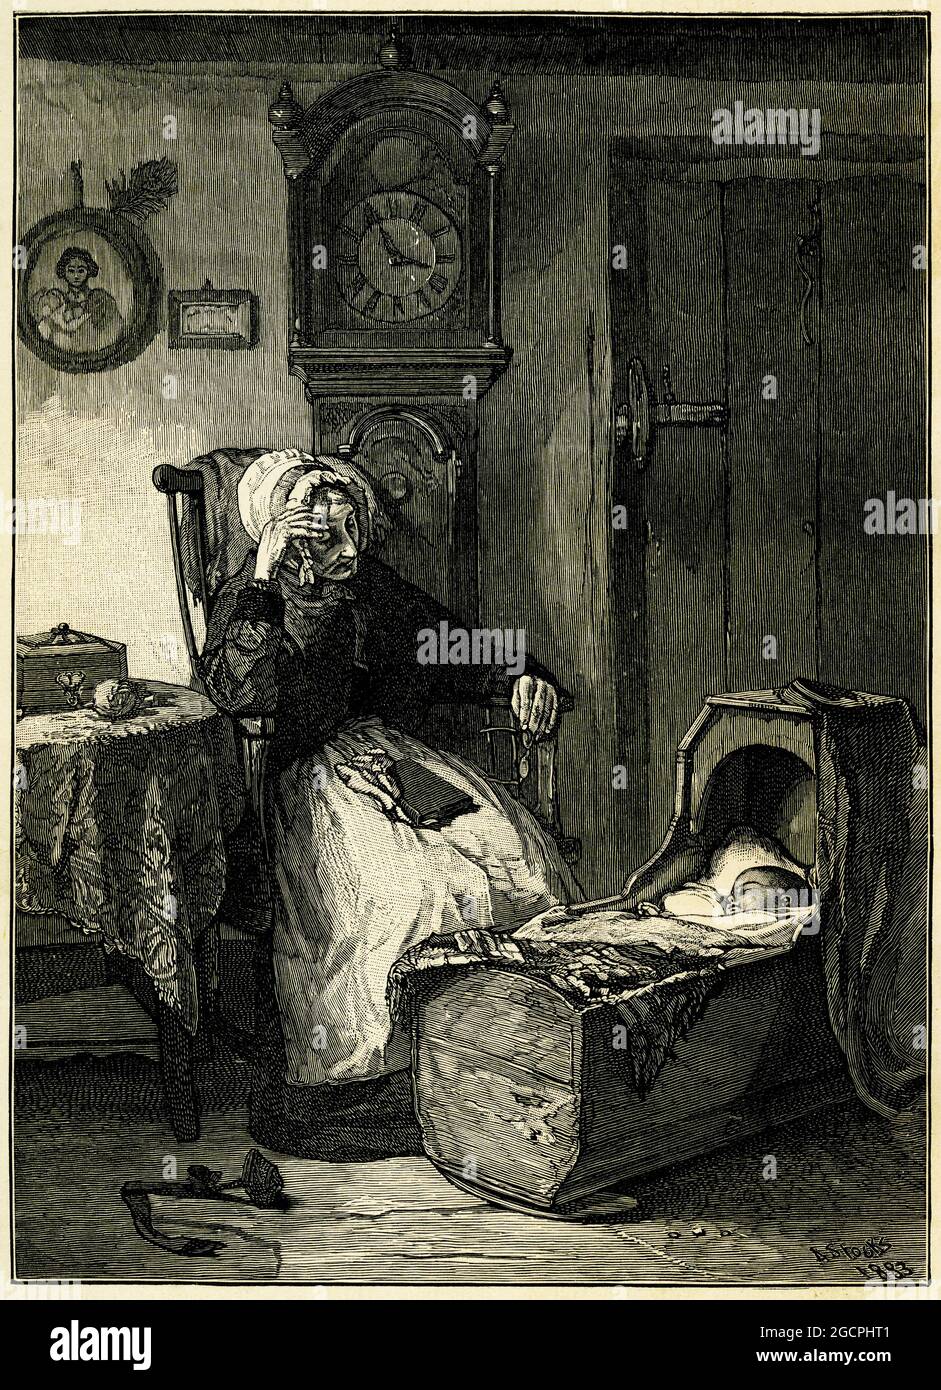 illustration of an elderly woman tending to a baby in its cradle, Victorian English setting Stock Photo